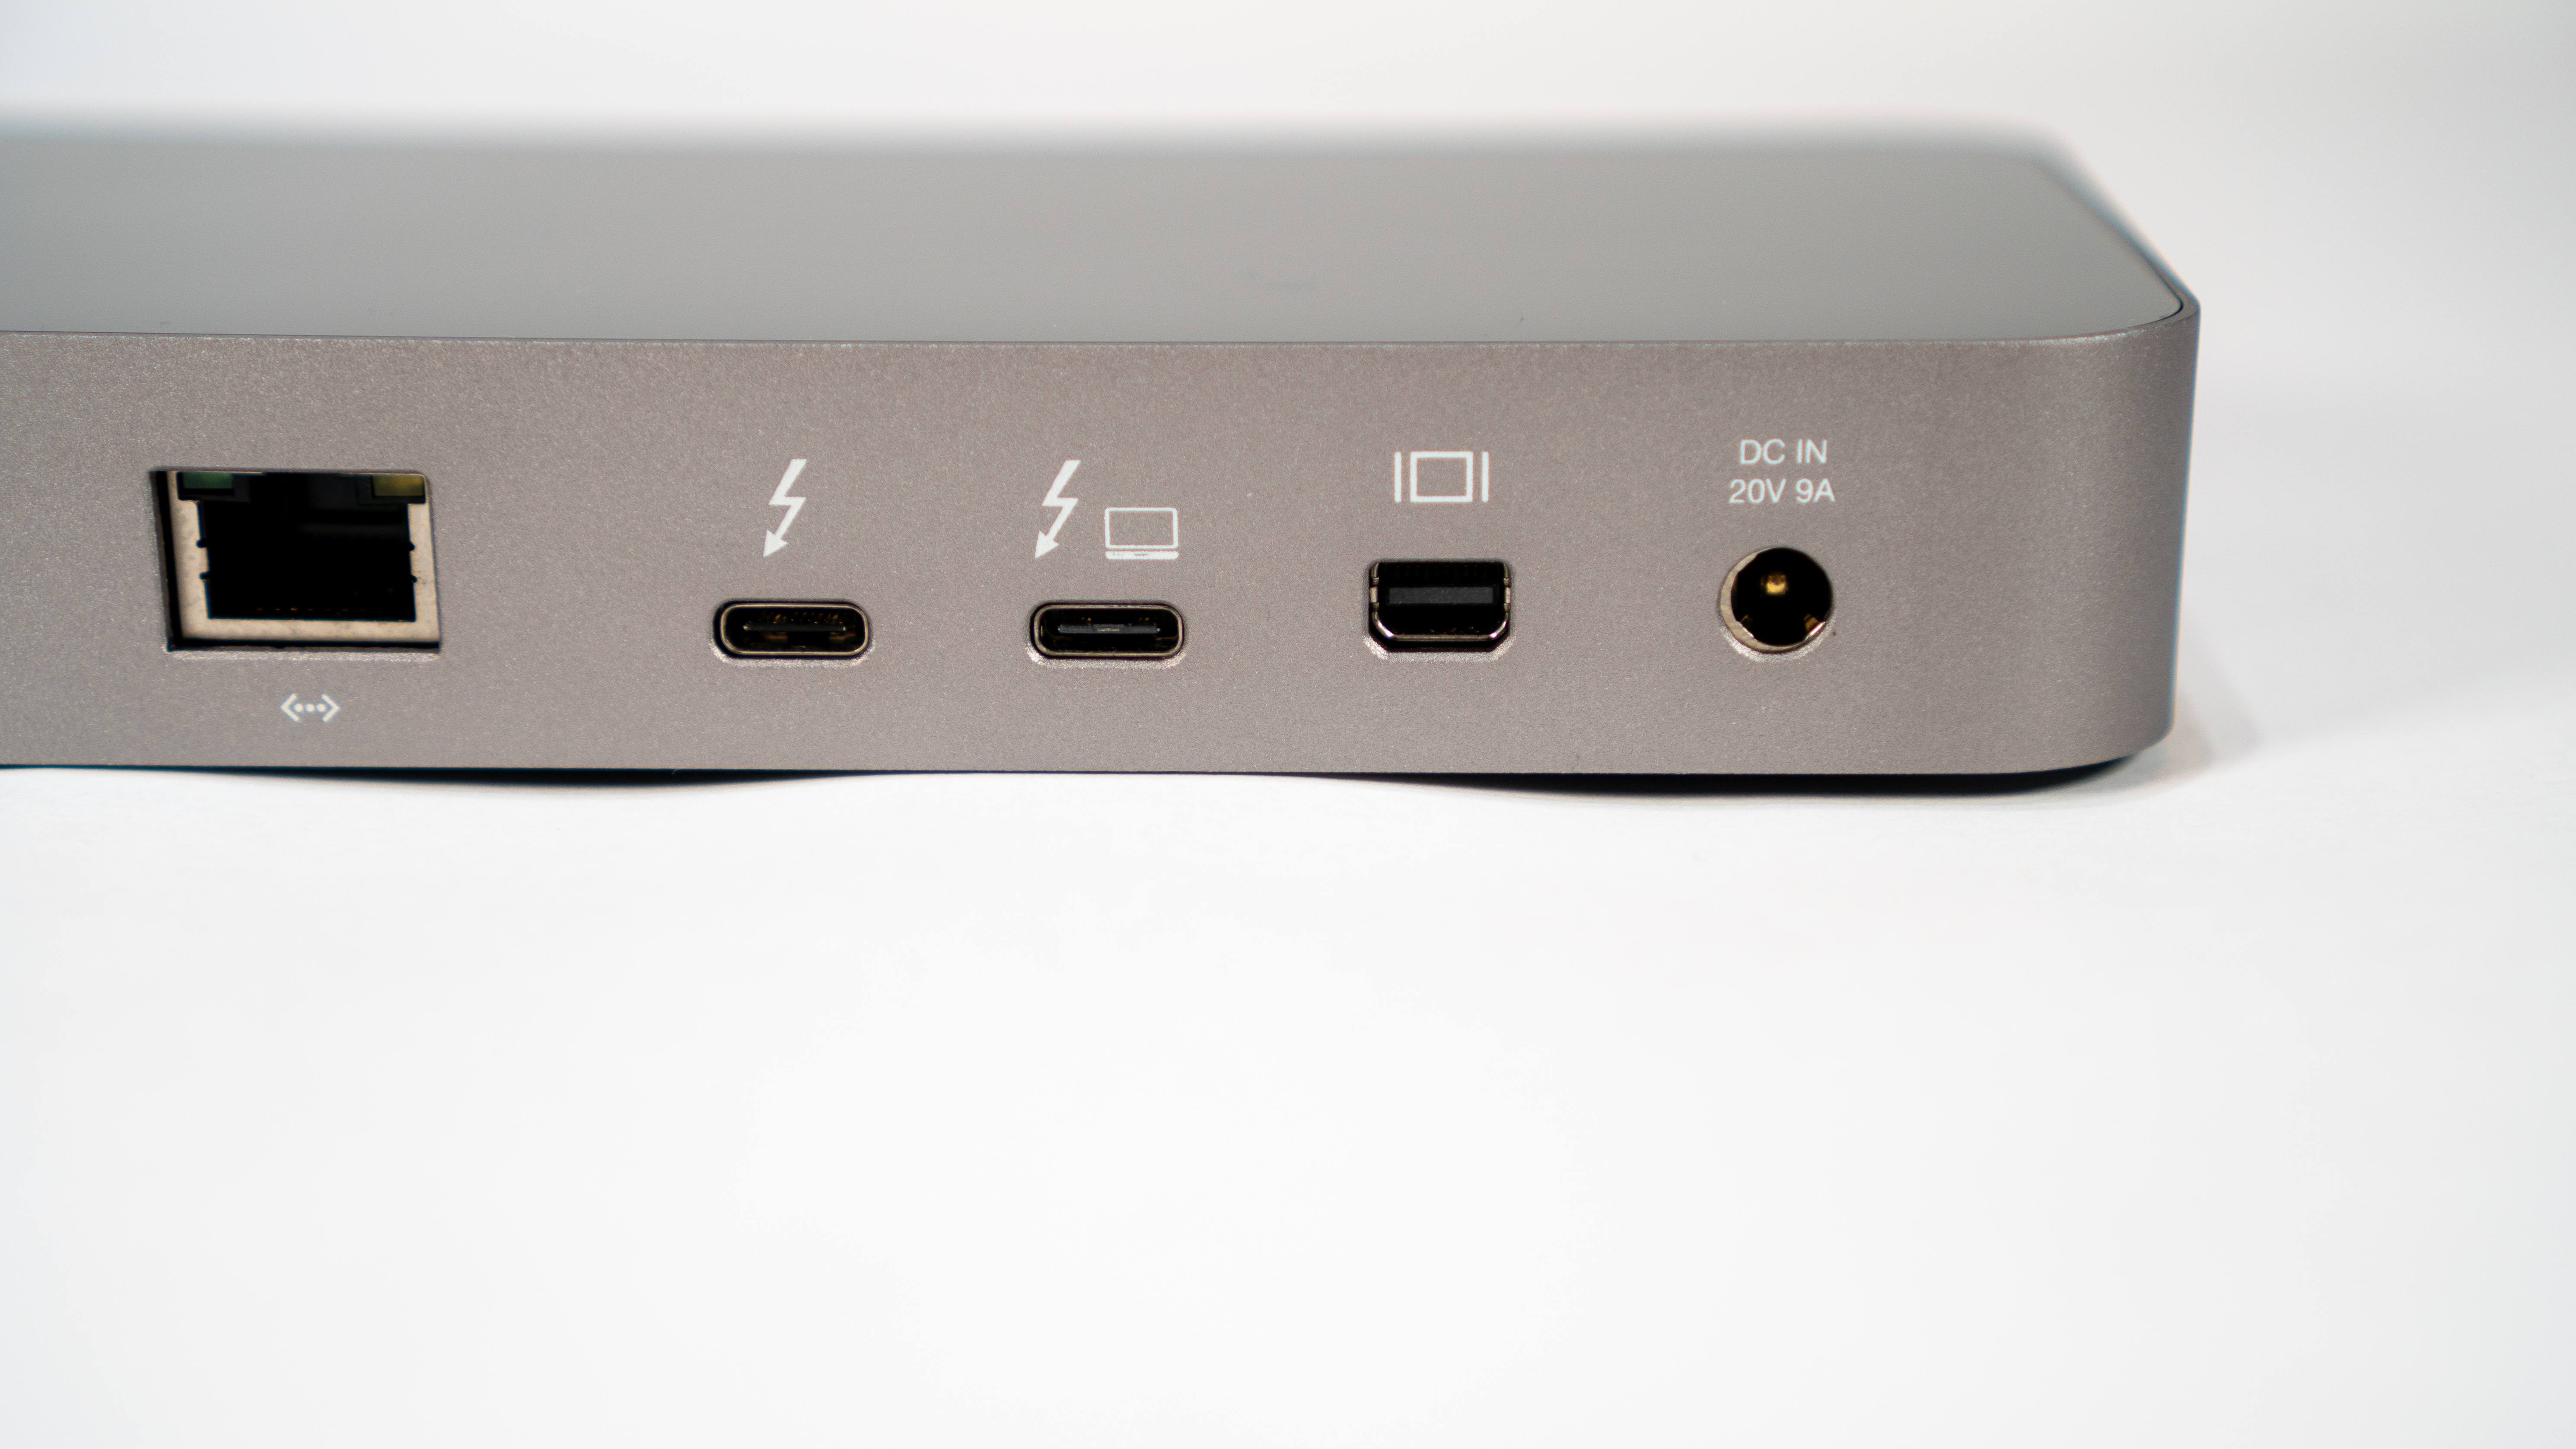 The other side of the dock features Ethernet, Thunderbolt 3 ports, Mini DisplayPort, and an input for the dock's power adapter.